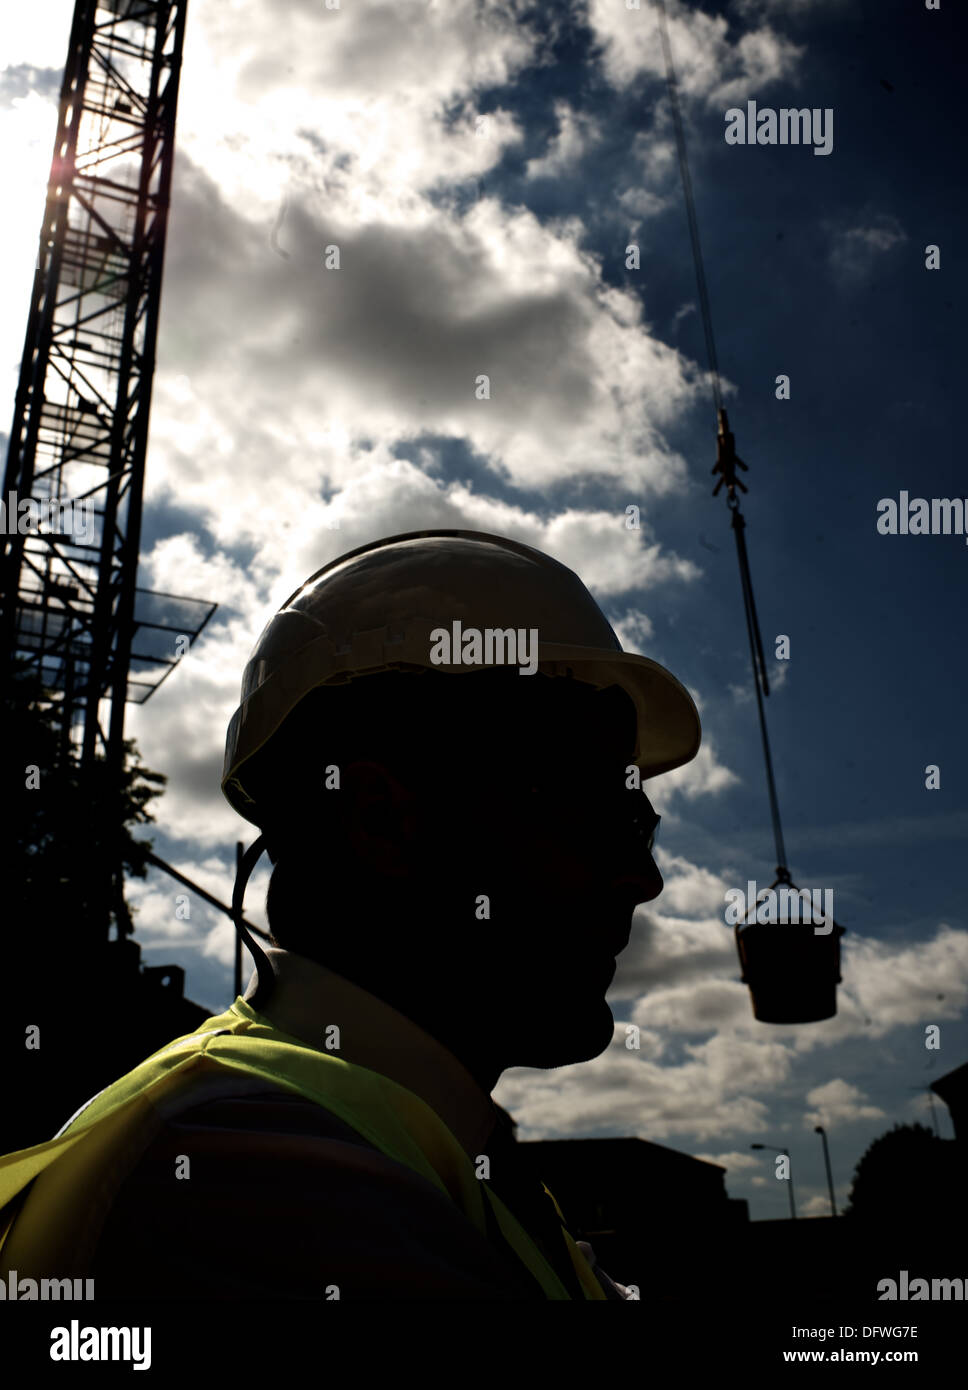 Construction Worker Silhouette High Resolution Stock Photography and ...